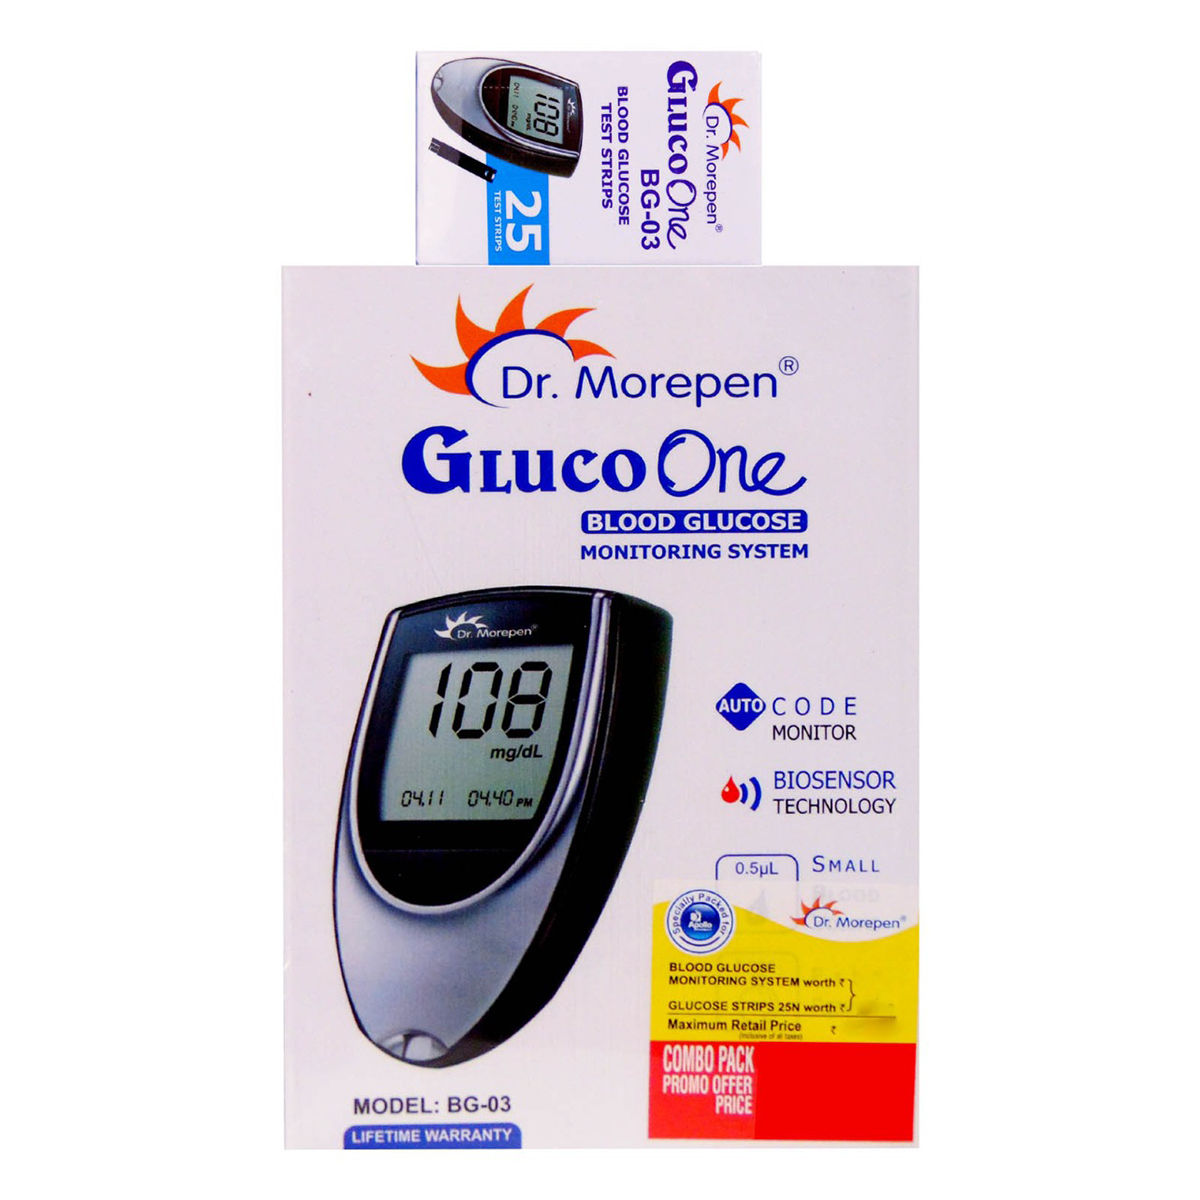 Buy Dr. Morepen Gluco One Blood Glucose Monitoring System BG-03, With 25 Free Test Strips, 1 kit Online